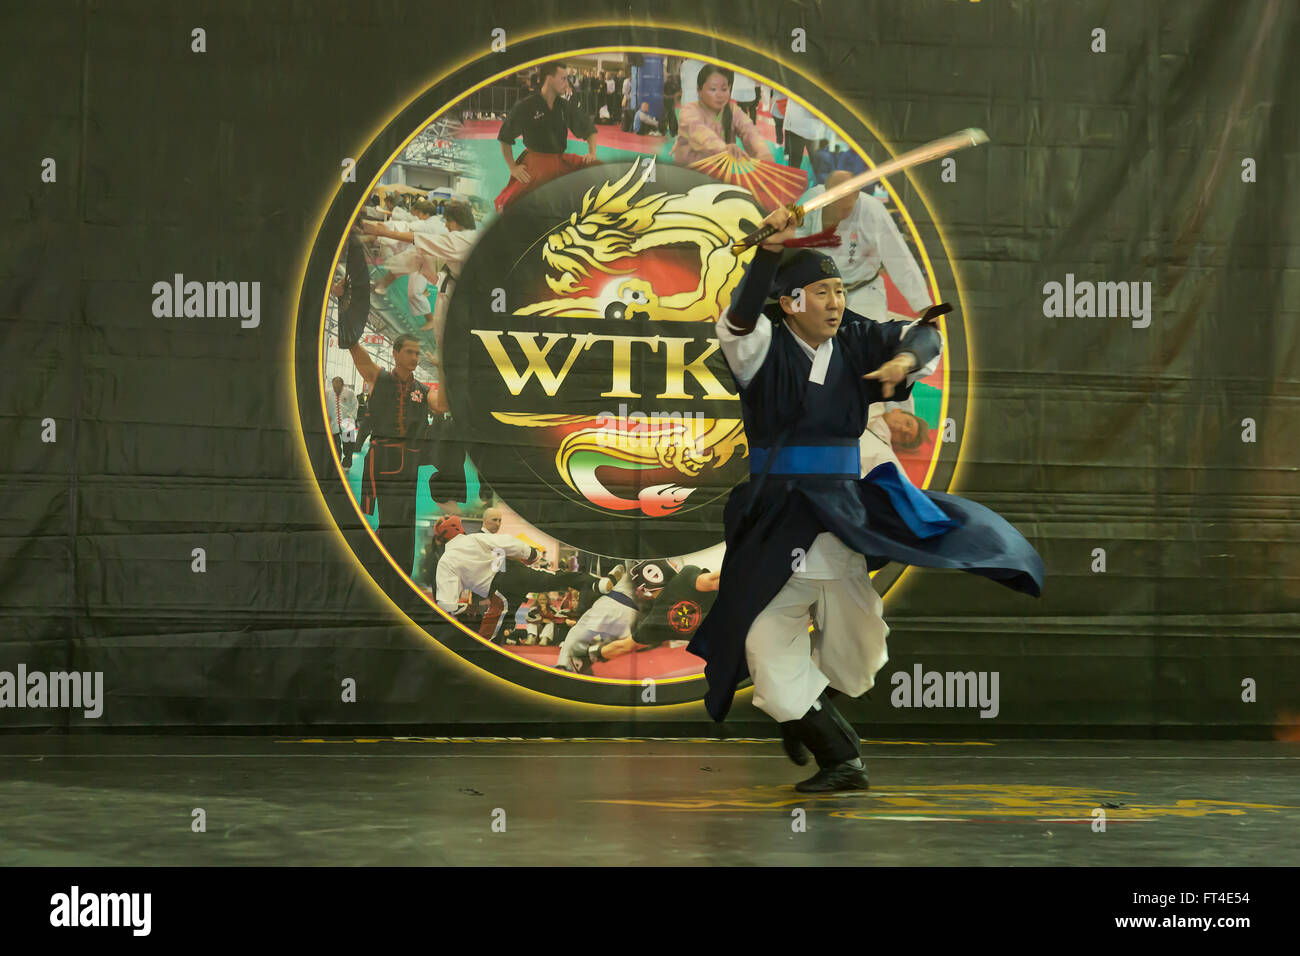 Sipalki Martial Art of Korea at the Budo Festival in Turin,Italy,managed by the WTKA, World Traditional Karaté Association Stock Photo